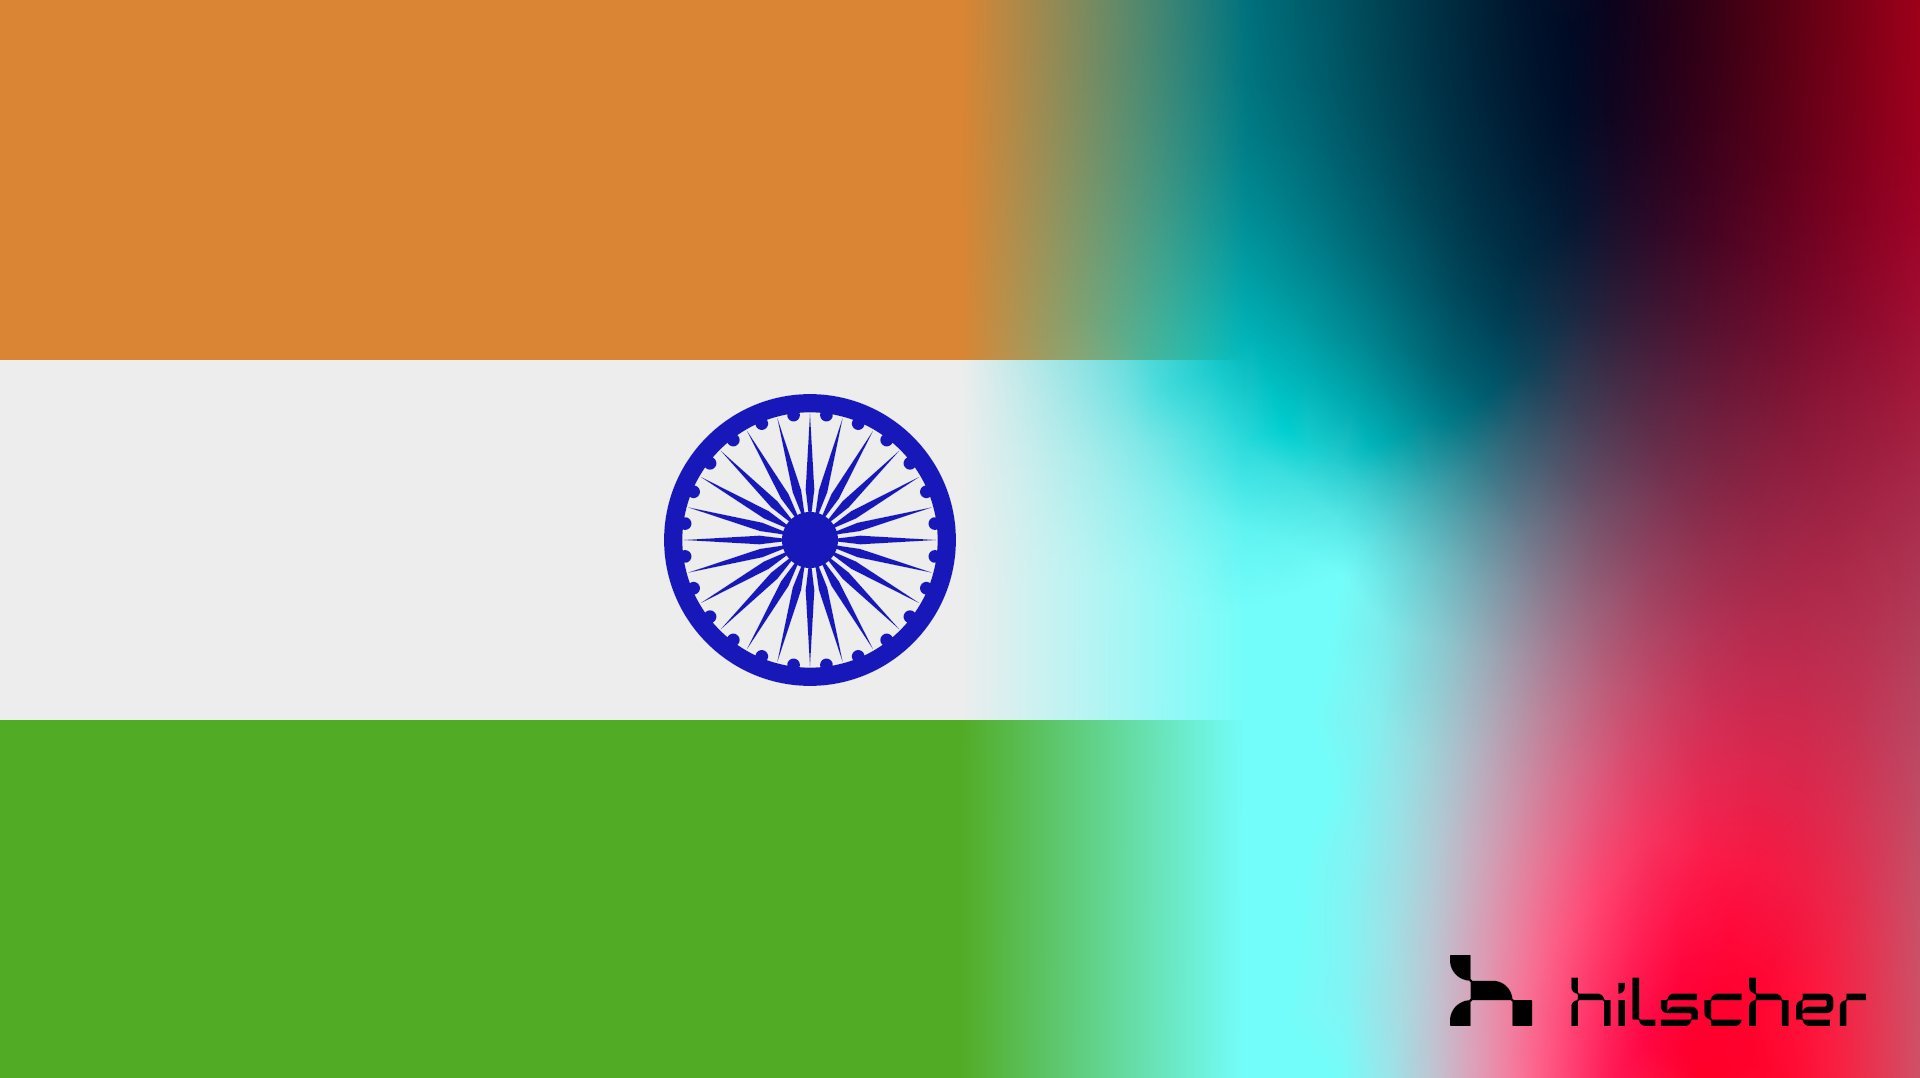 The flag of India. On the right side of the picture is a fade to a colorful space, accounting for nearly a quarter of the image.